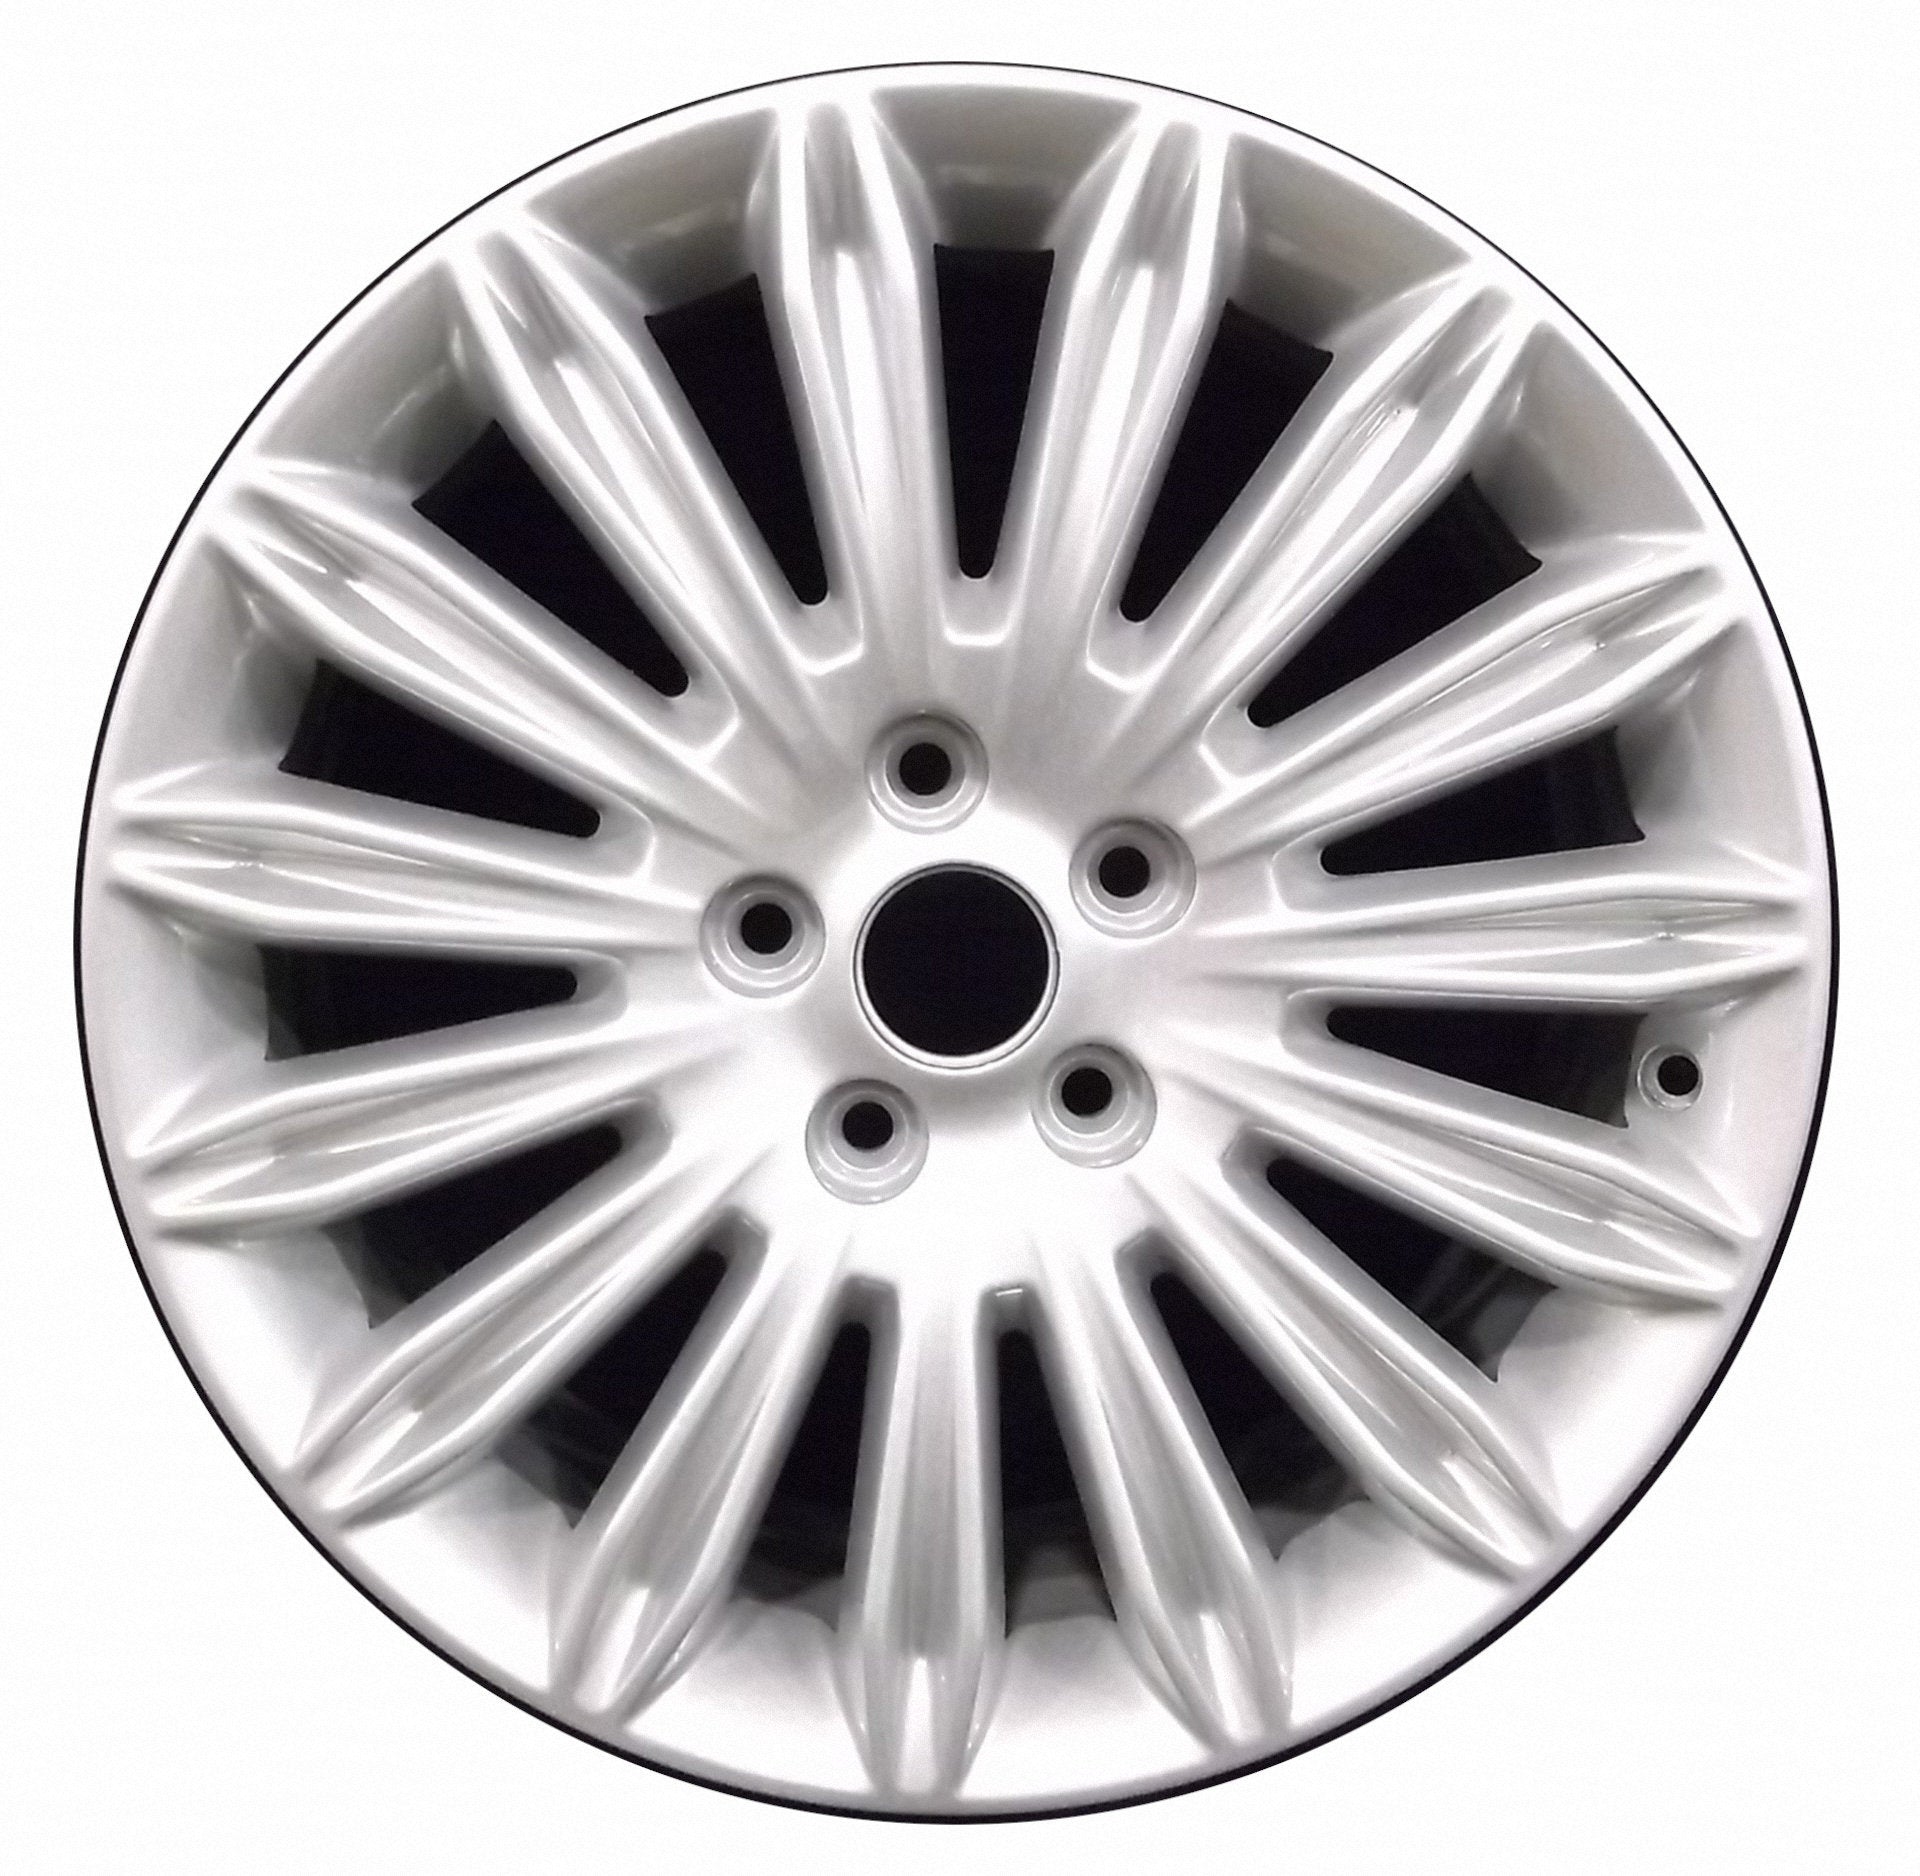 Ford Fusion  2011, 2012, 2013, 2014, 2015, 2016 Factory OEM Car Wheel Size 17x7.5 Alloy WAO.3958.PS08.FF